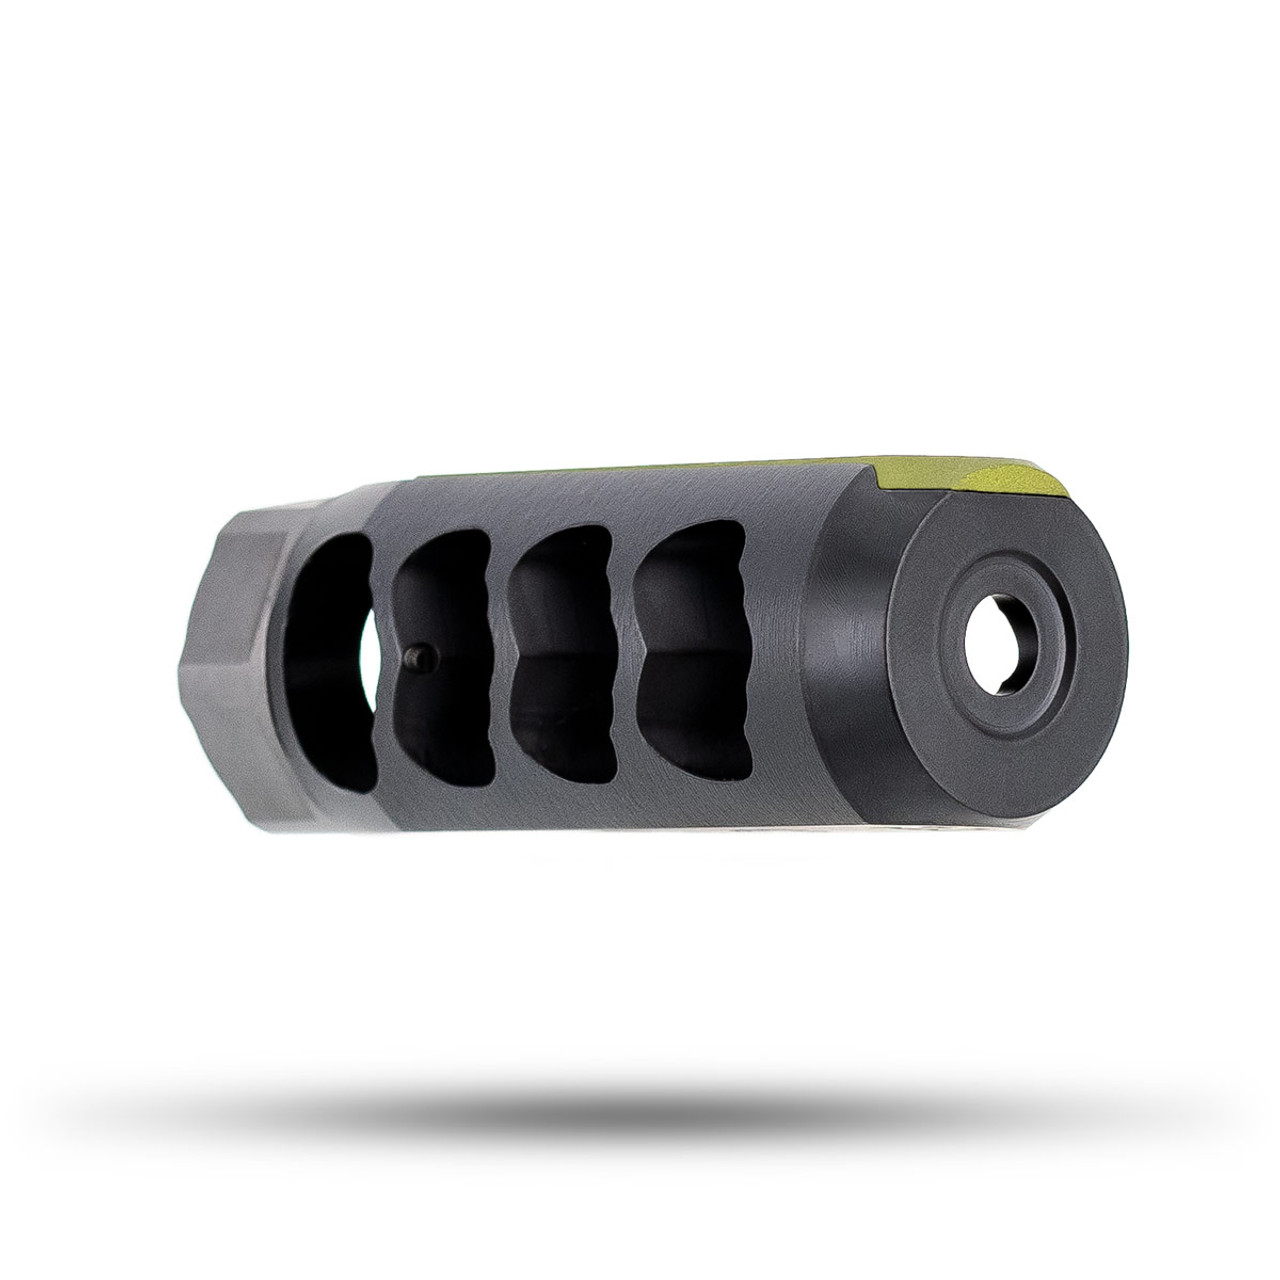 Cleaver Firearms - Due Late This Month !!! MDT ELITE MUZZLE BRAKE